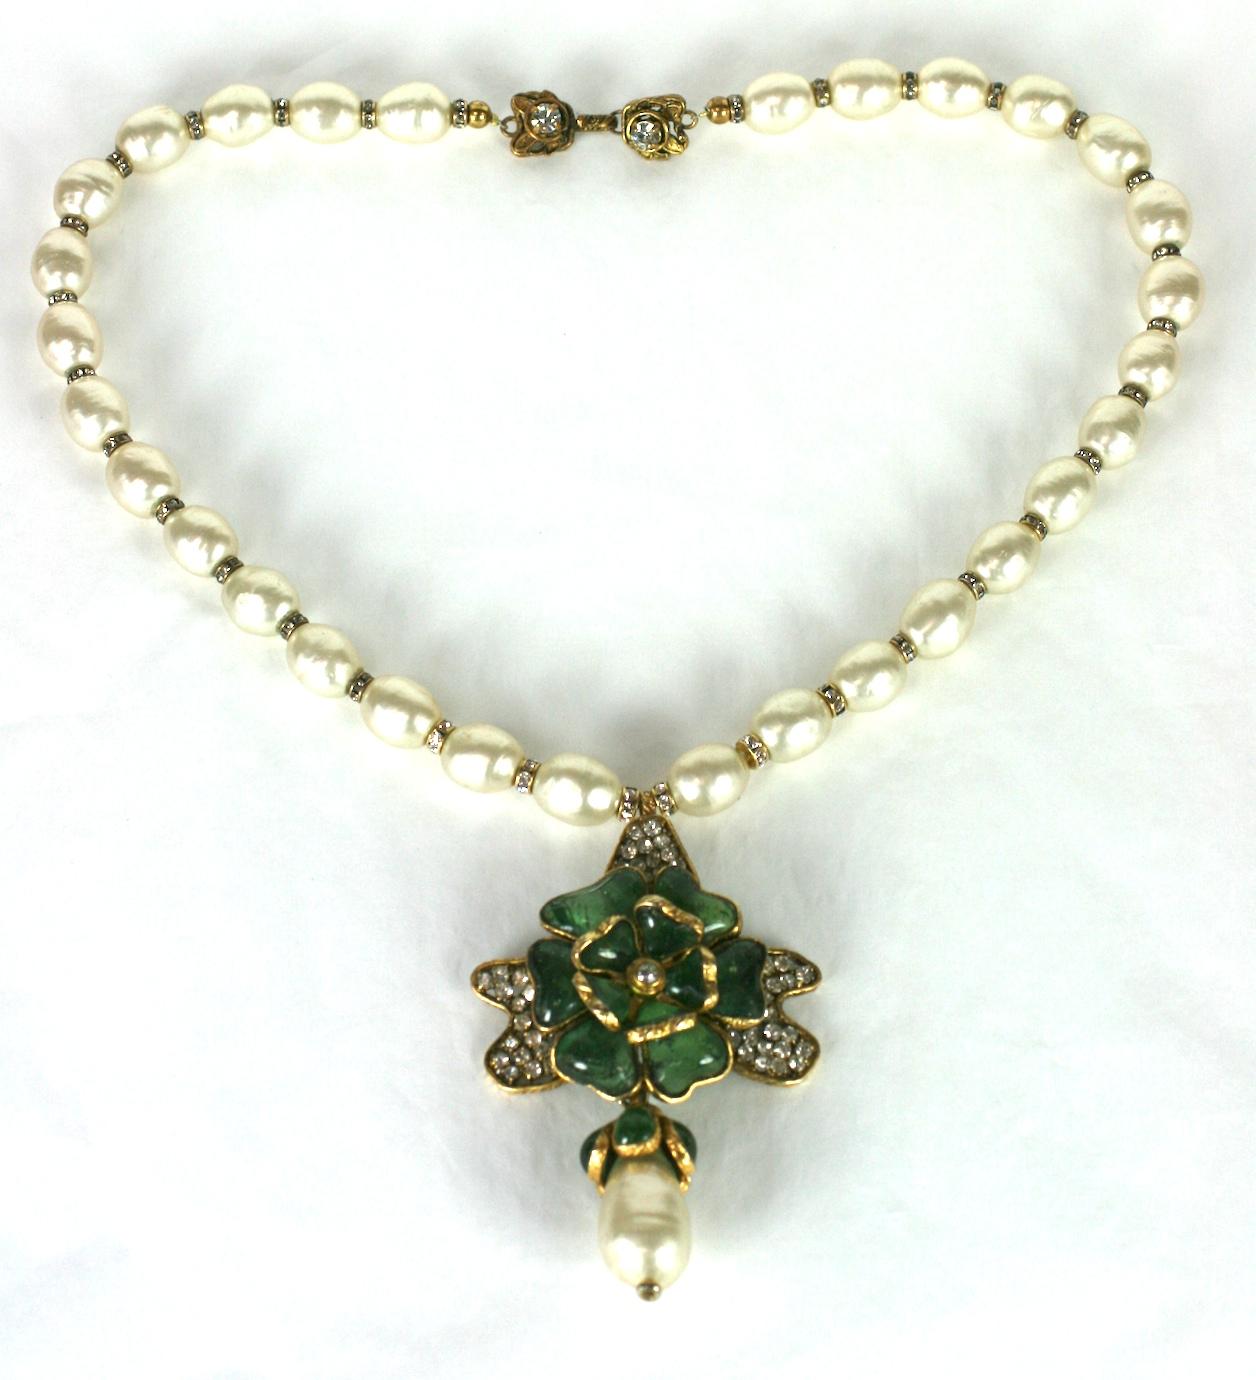 Elegant and striking Chanel Gripoix Flower Pendant Necklace of handmade oval faux pearls, which are strung with tiny pave rondels. The hand made poured glass flower by Gripoix is emerald glass within a handmade setting of pave petals. 
A large faux